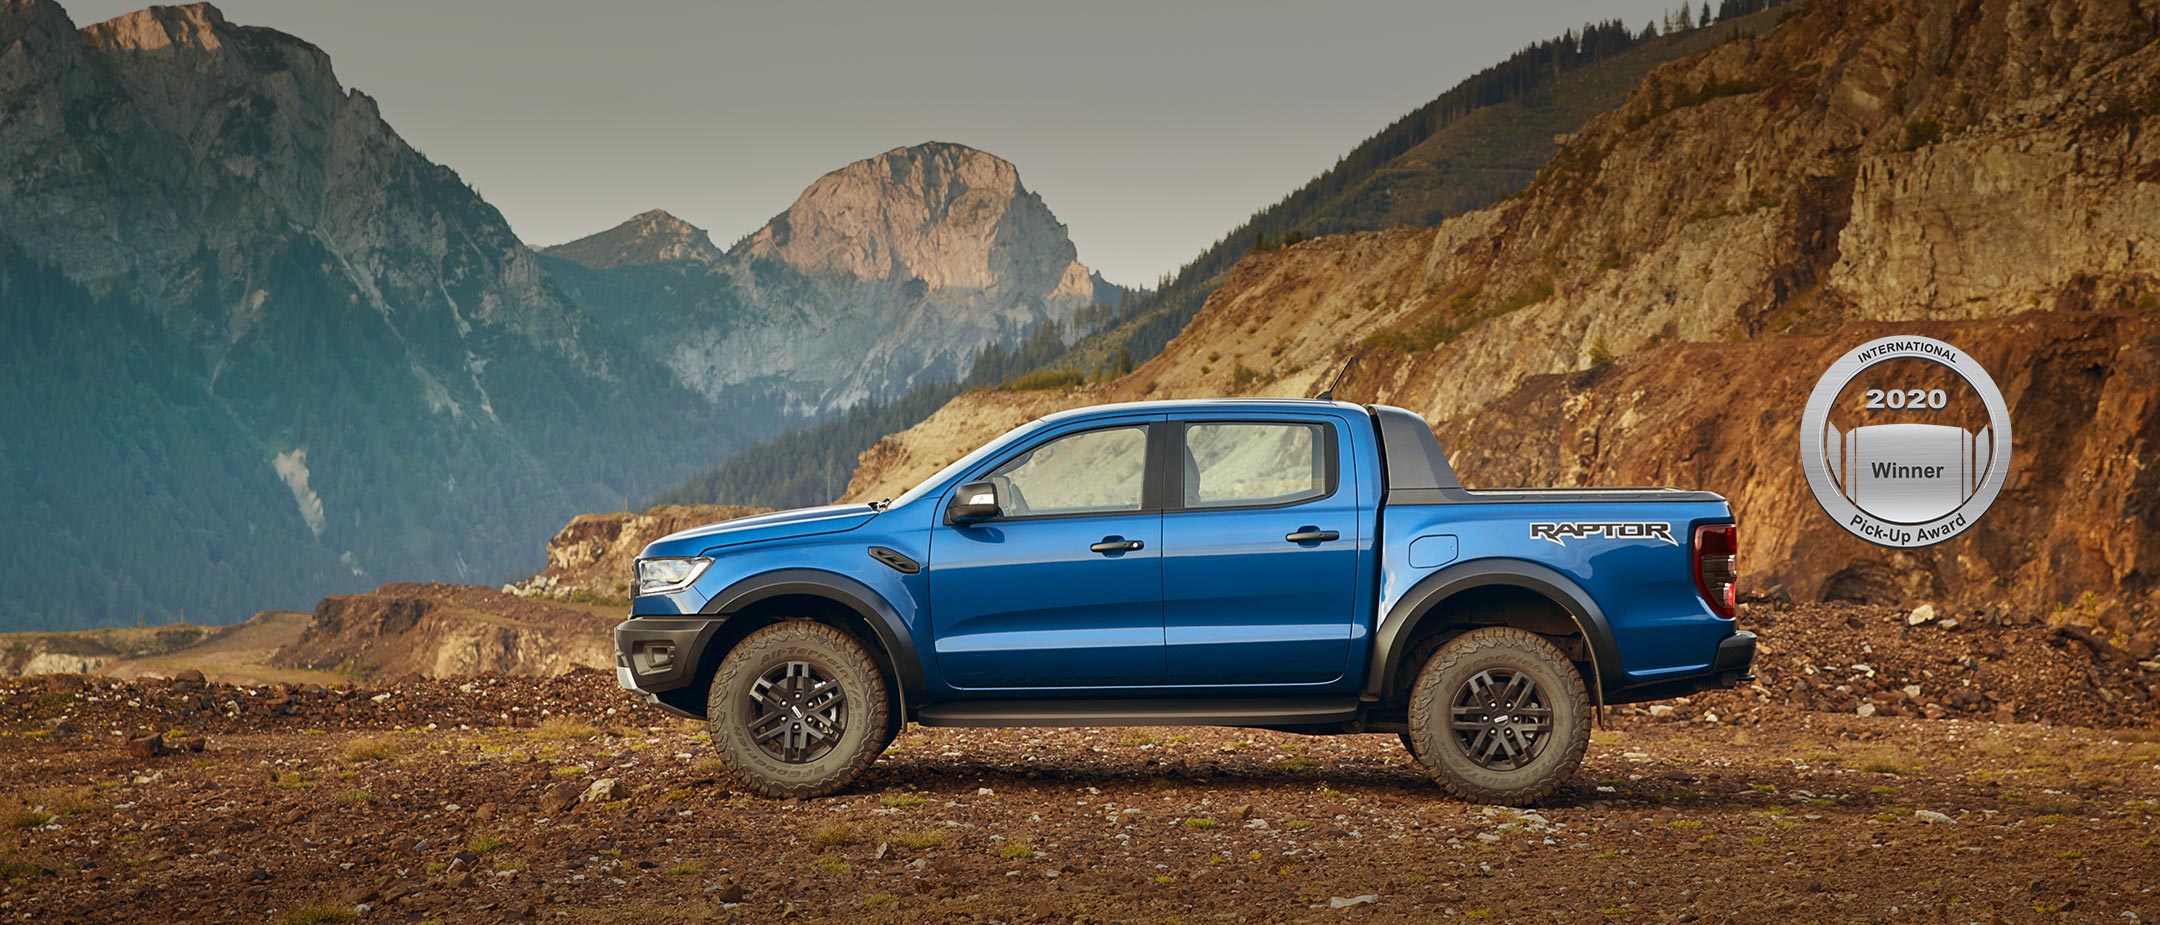 Ranger Raptor parked with mountains backdrop